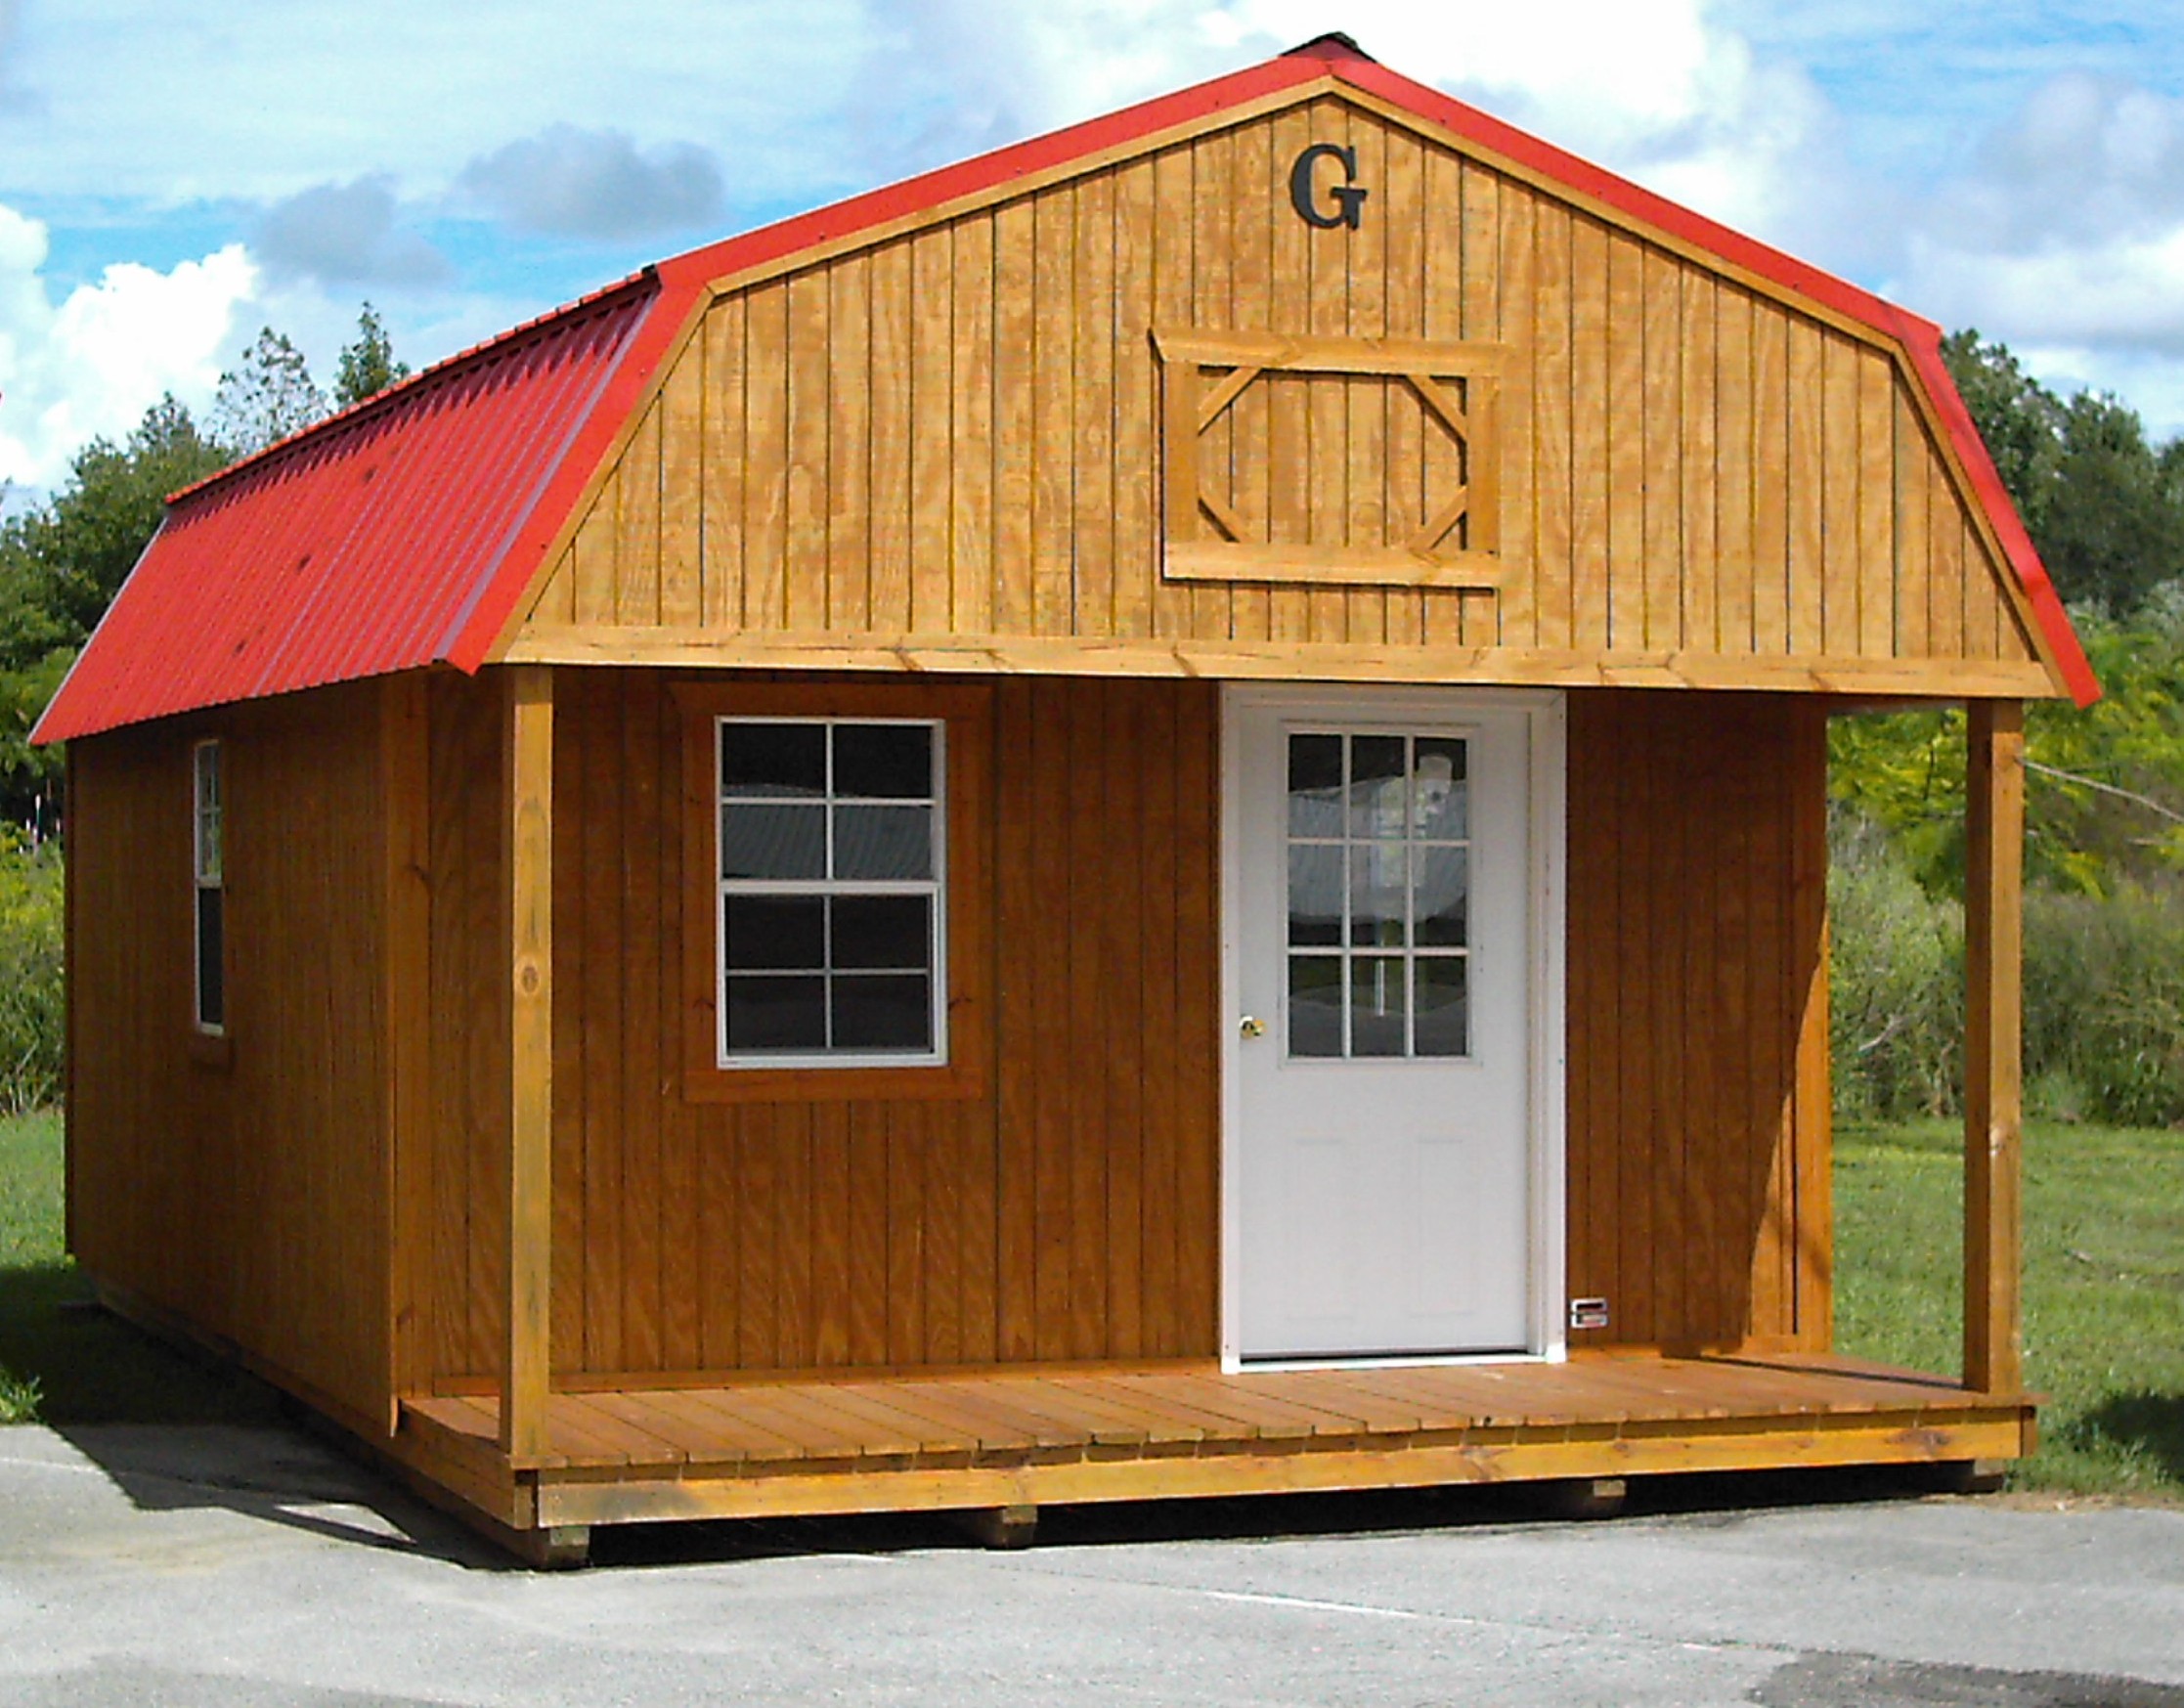 portable storage sheds the buildings offer quality wood, metal, or painted finishes. many colors VKIEAKJ